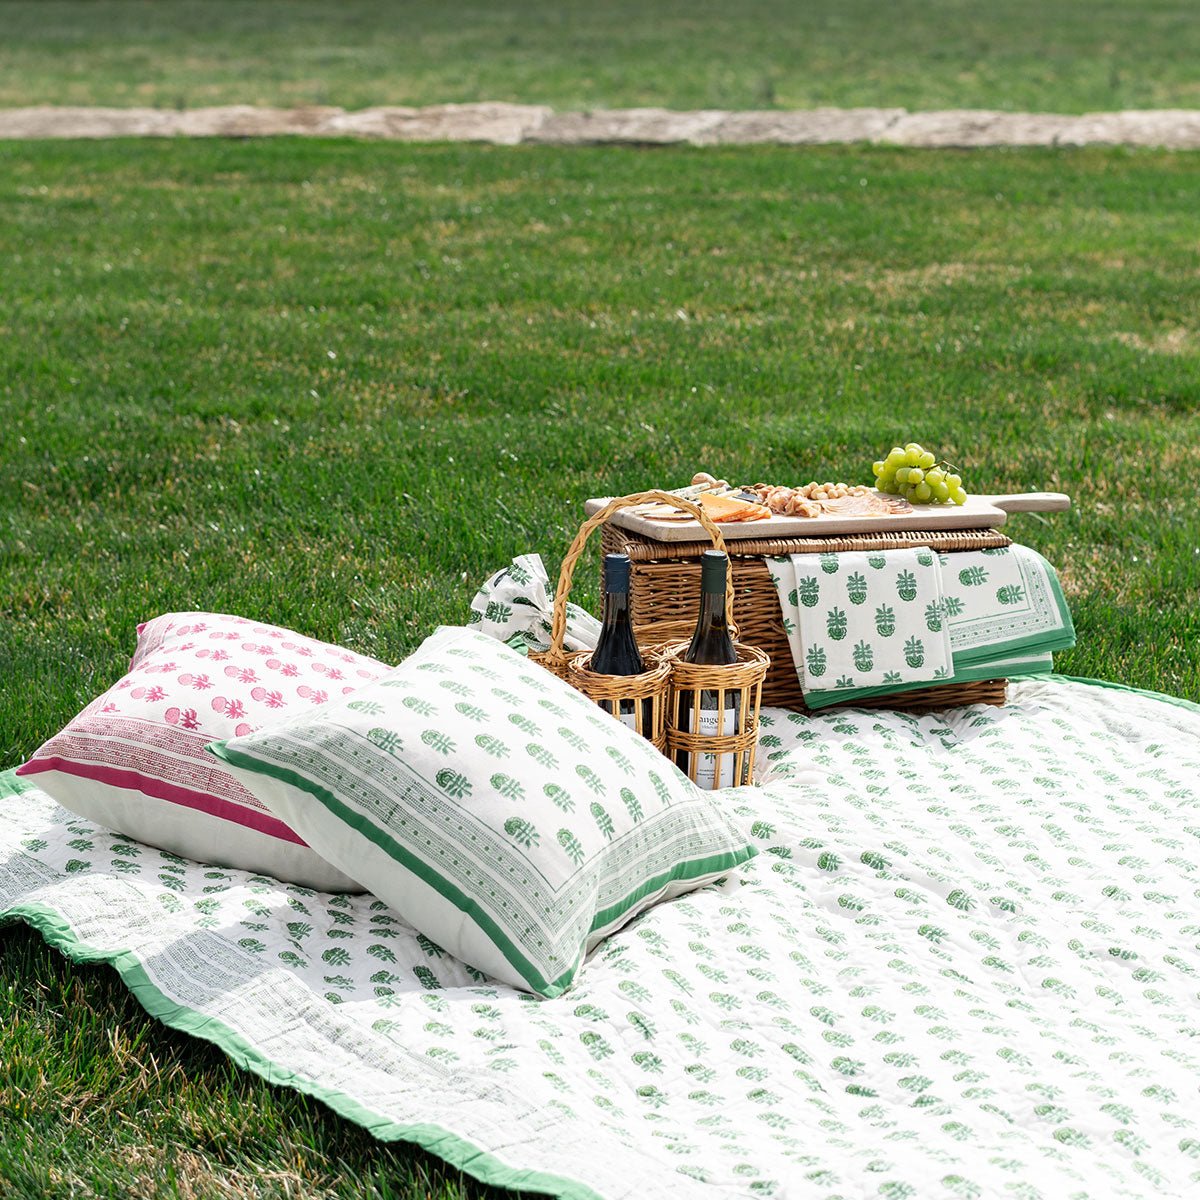 Perfect to lounge on during an outdoor picnic. 